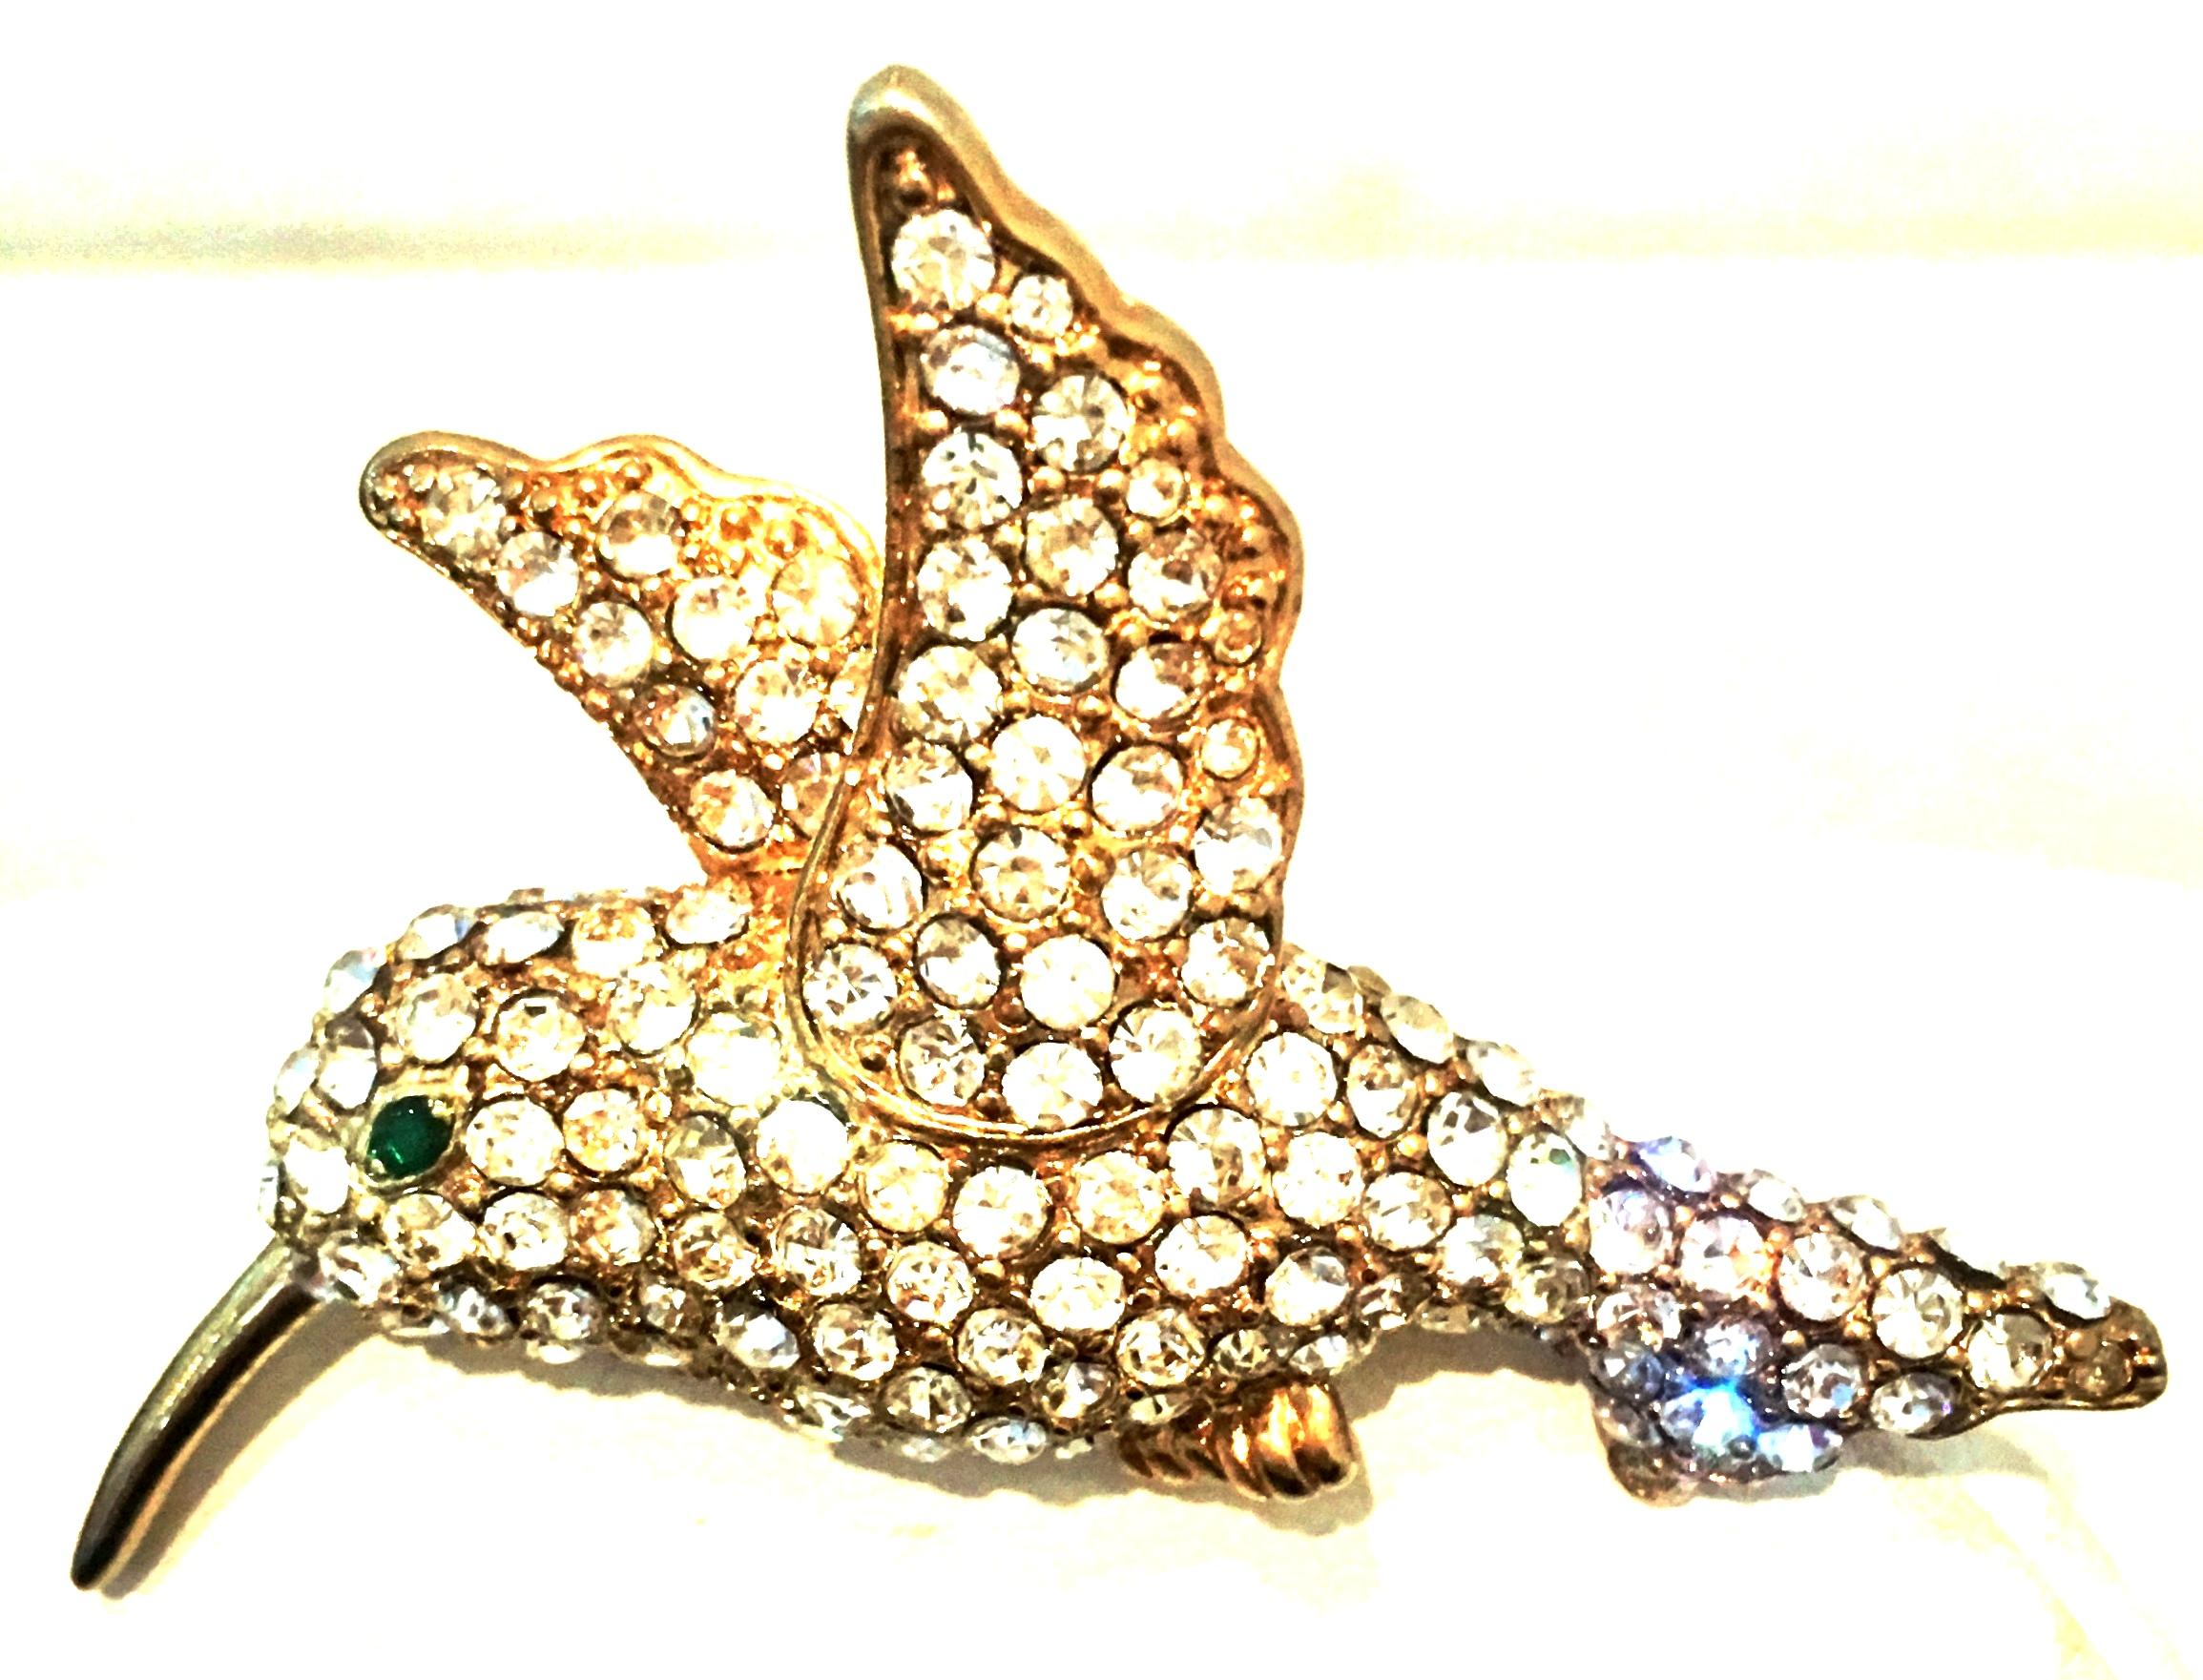 20th Century Gold Plate & Swarovski Crystal Dimensional Hummingbird Brooch.
Features pave set round cut and faceted colorless Swarovski Crystal stones. The hummingbirds eye is of emerald green in color.